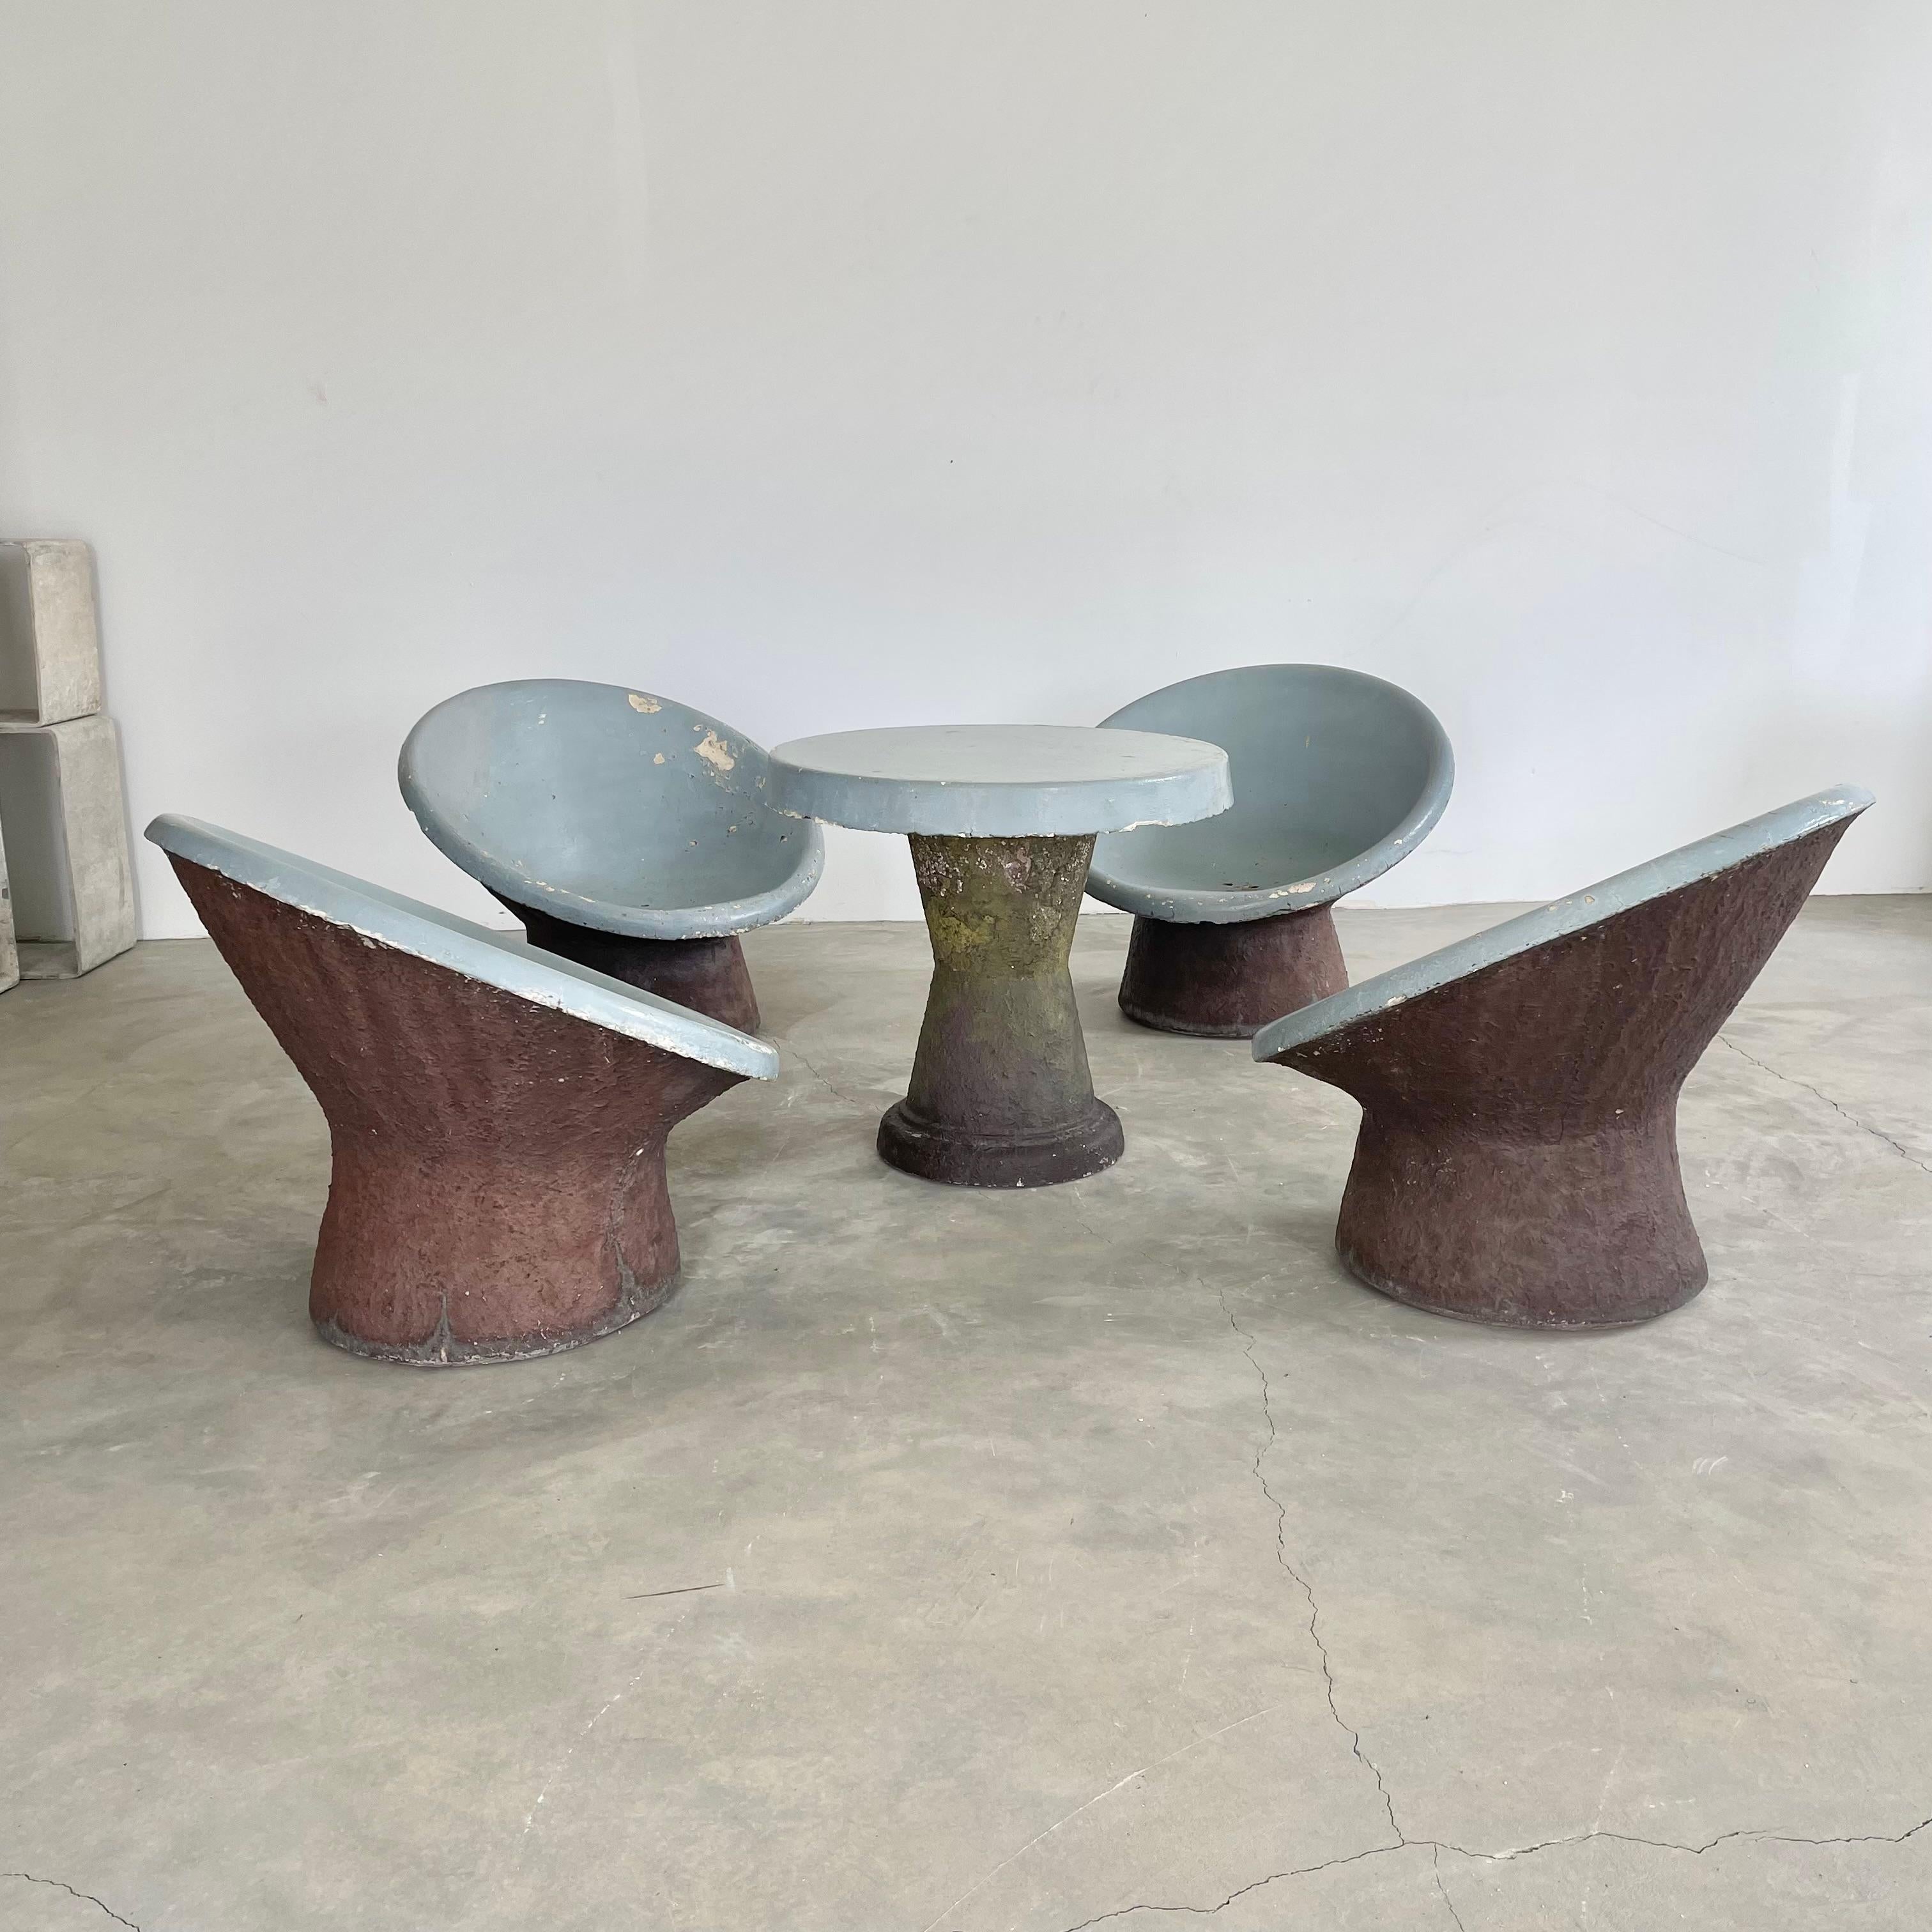 Incredible outdoor table and chairs set consisting of four chairs with a matching table, all made of solid concrete in Switzerland, circa 1960s. The seats of the chairs as well as the table top are hand painted in a medium gloss grey paint with the